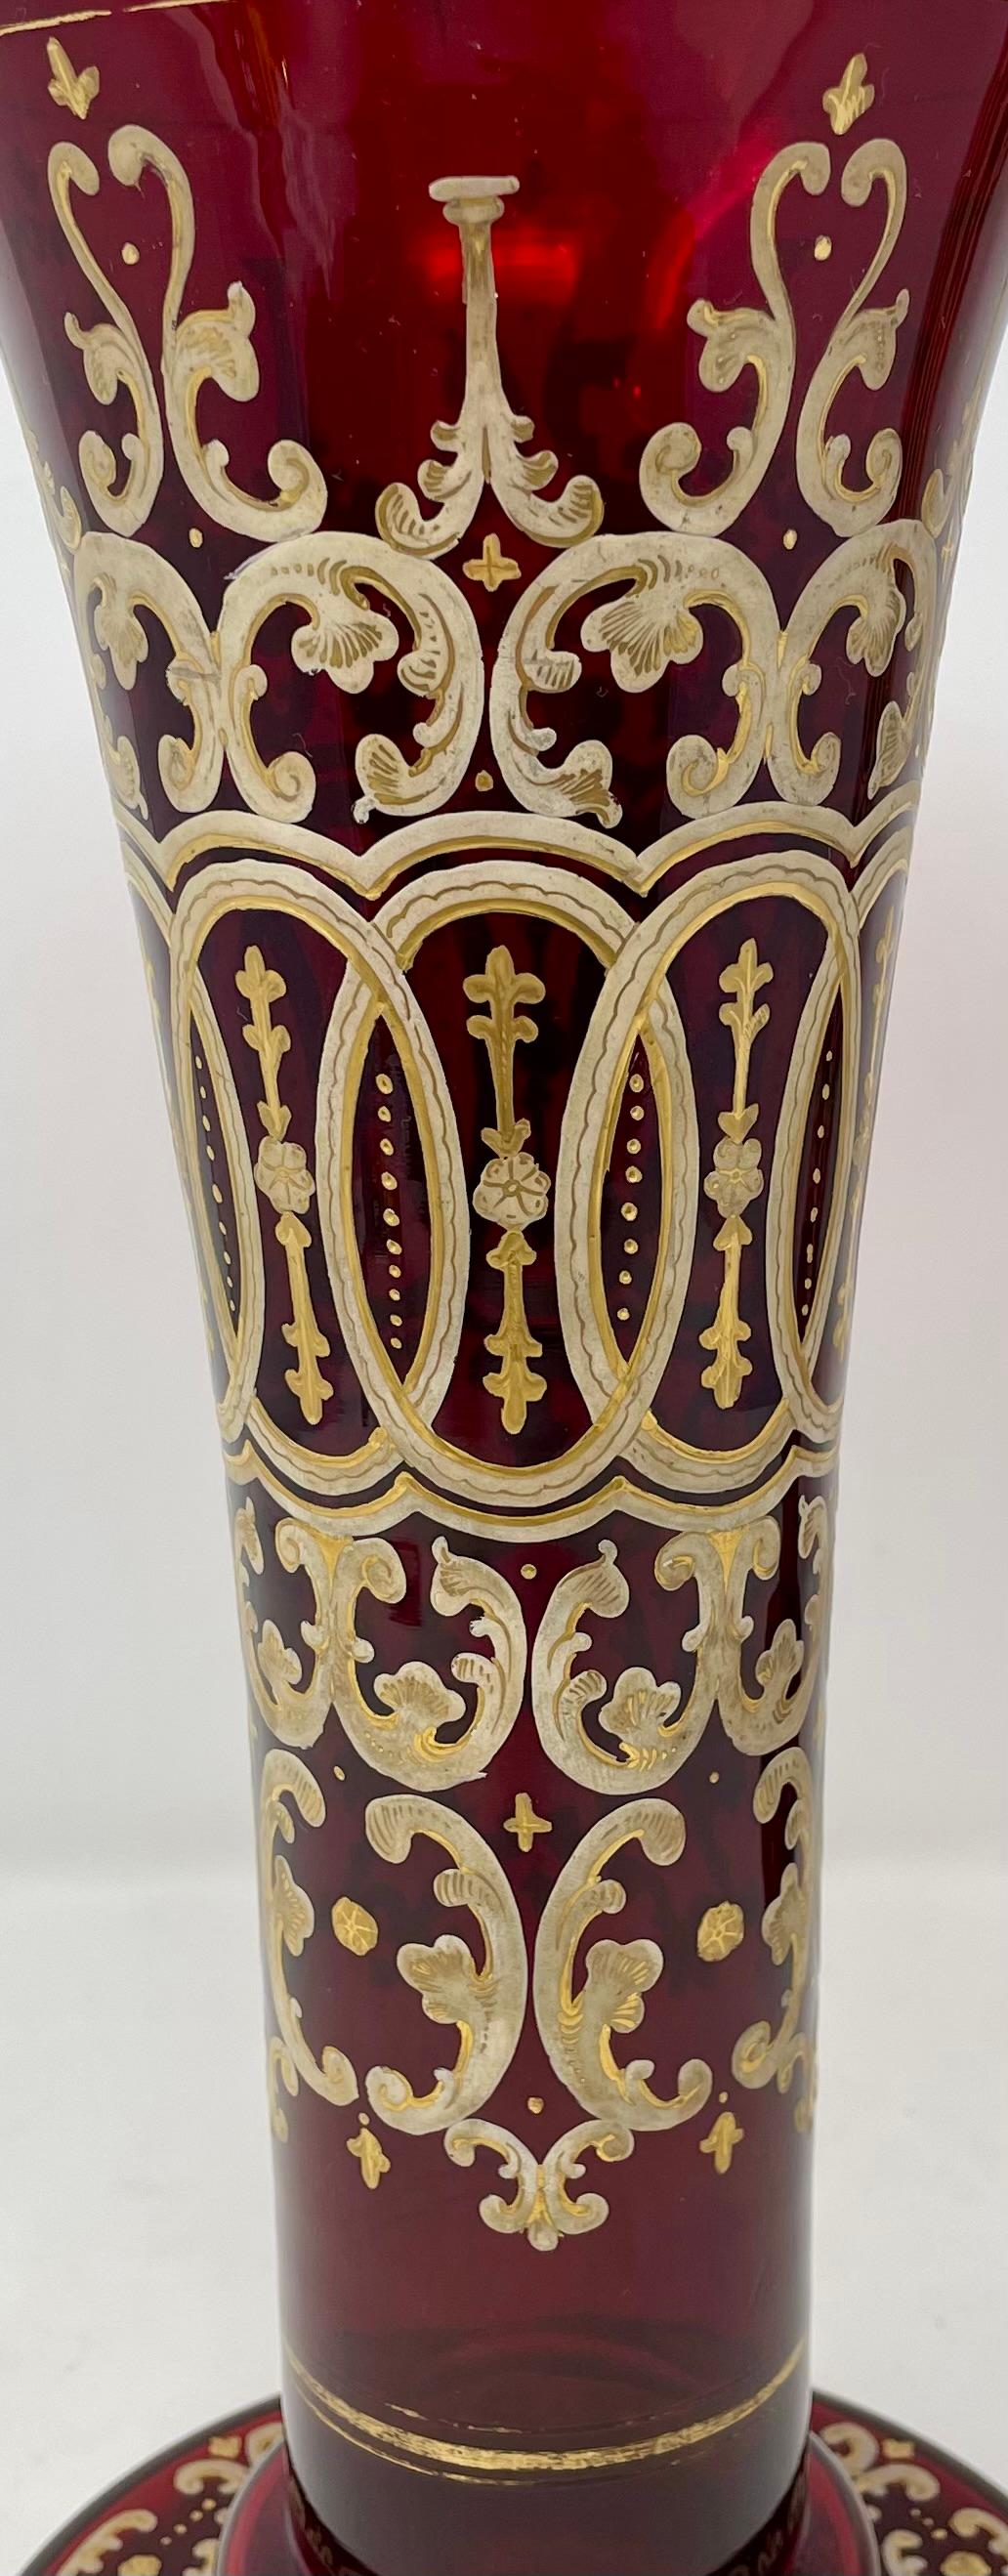 Pair Antique Ruby Glass Vases with Hand-Painted Gold Details, Circa 1890. For Sale 2